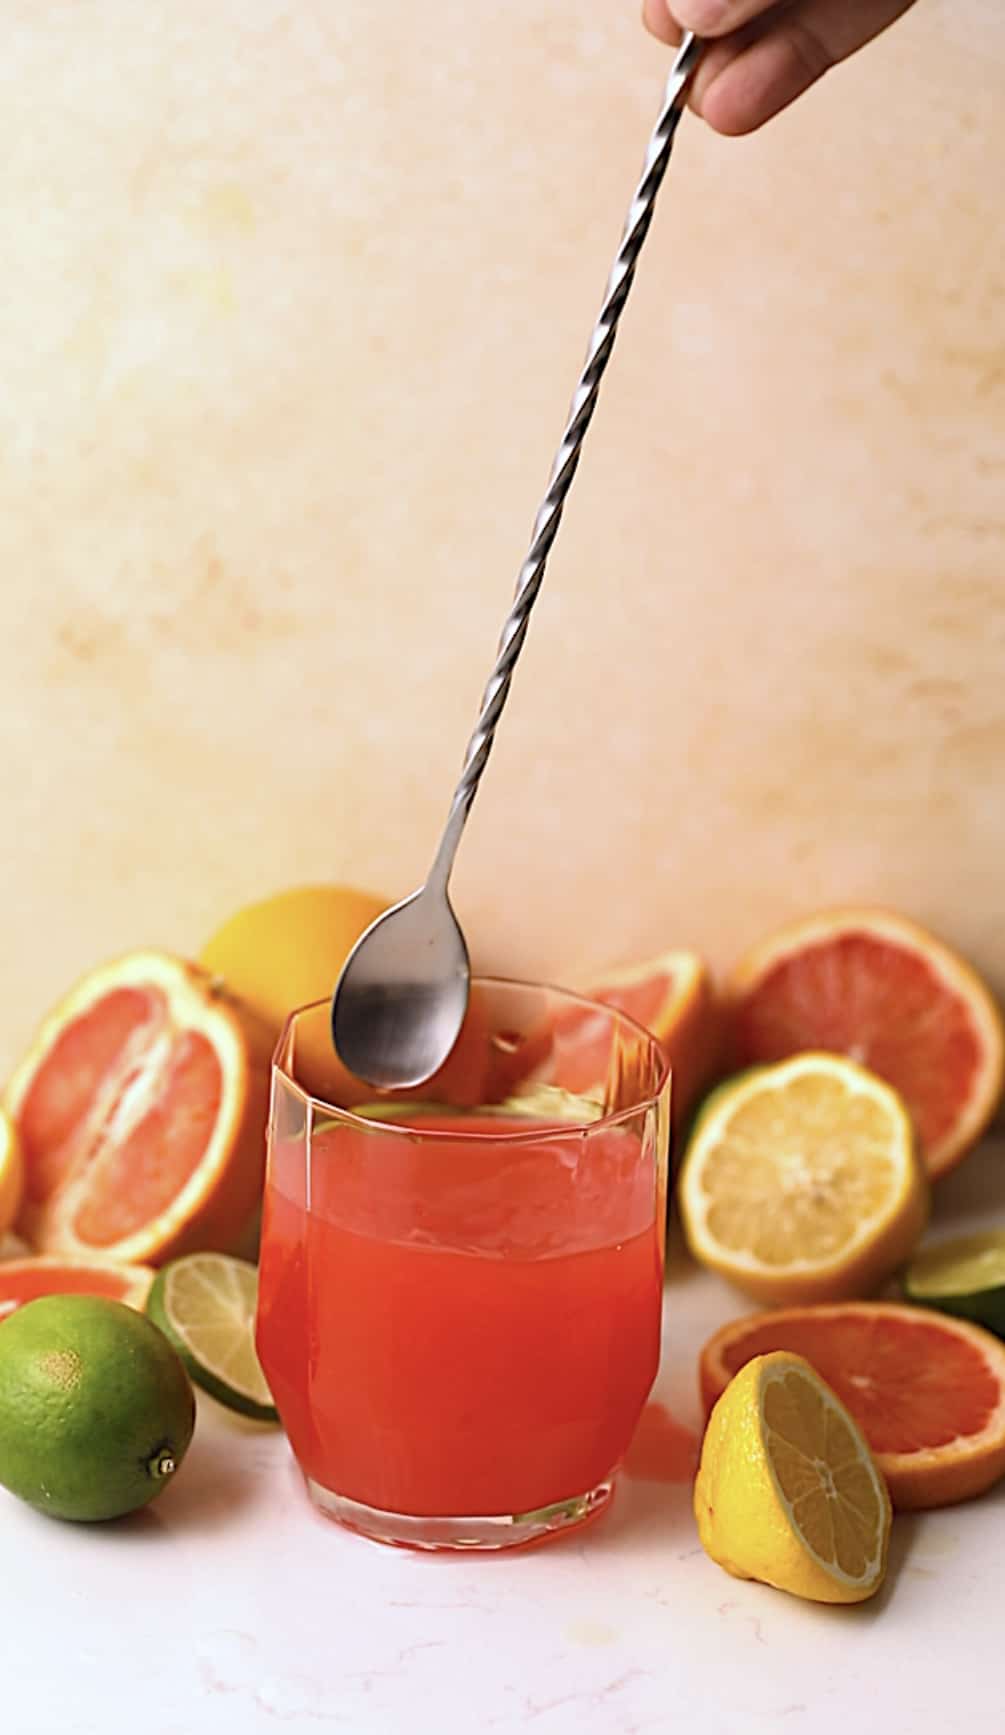 A cocktail stirrer mixing a bahama mama in a cocktail glass.